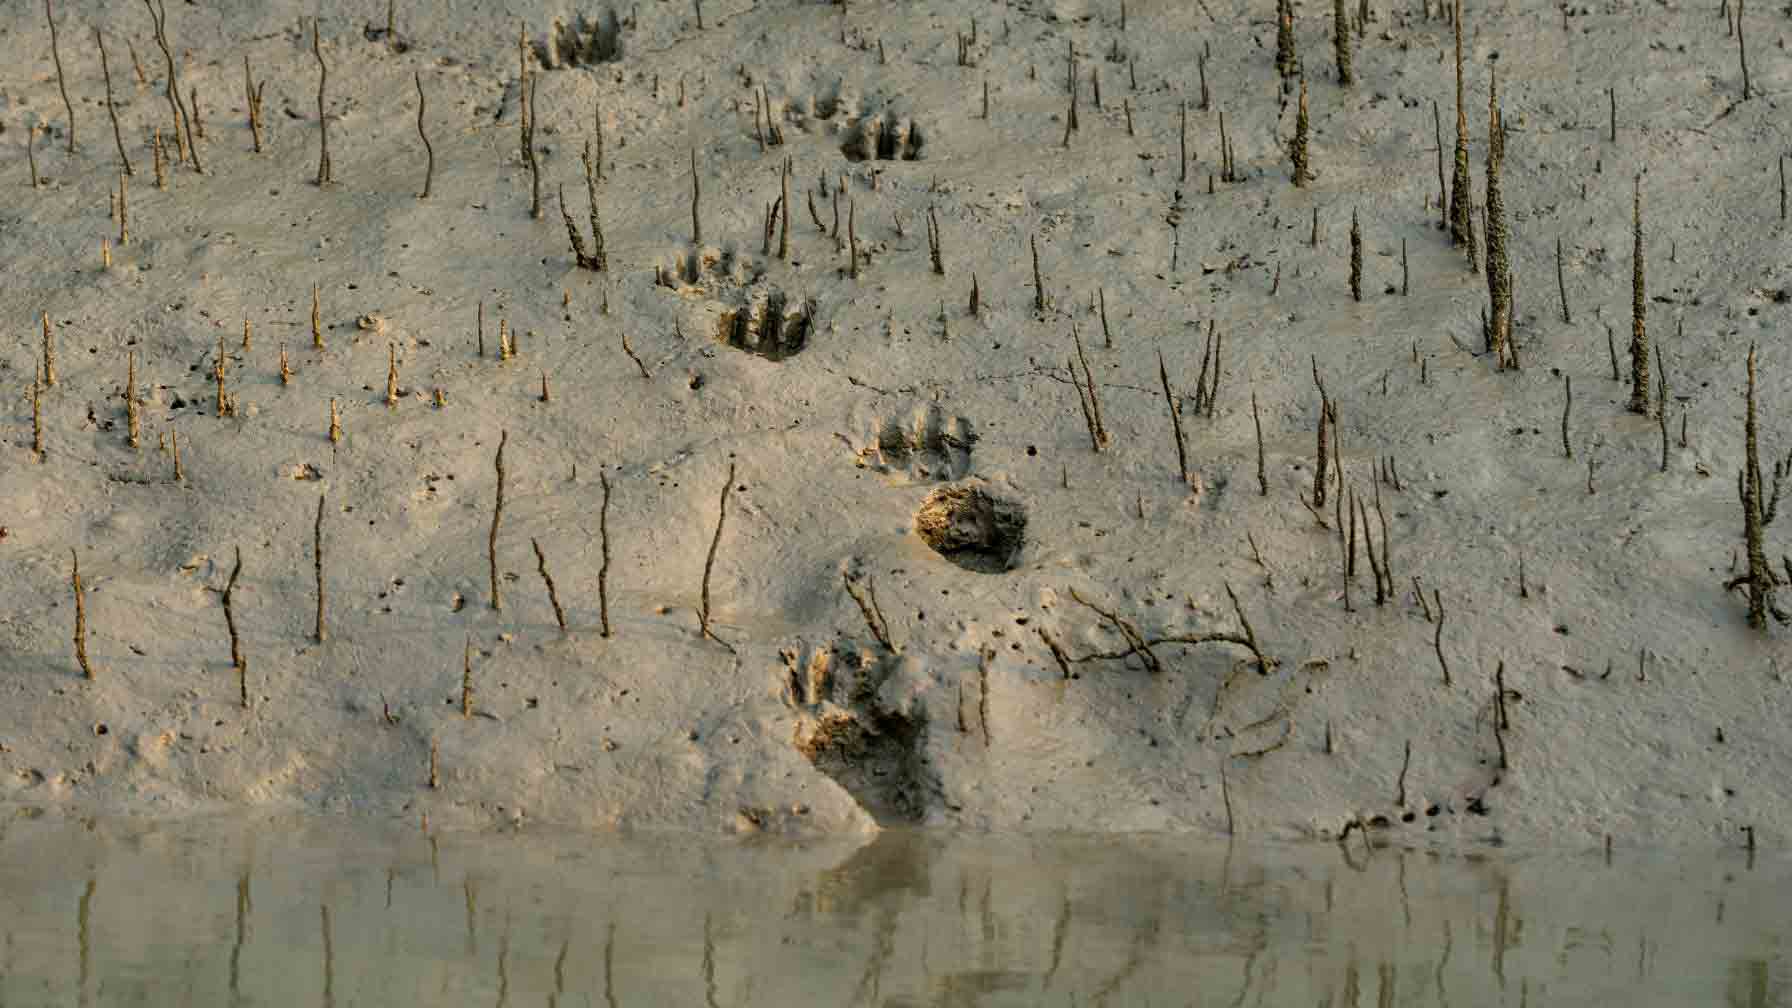 The star of the Sundarbans, the Bengal or Royal Bengal tiger, is a rarer sight. Only a few hundred of them still live here – and this is the only place in the world where tigers can be found in mangrove ecosystems. Our photographer Tapash discovered fresh big cat tracks while exploring the area. © Tapash Paul/GIZ